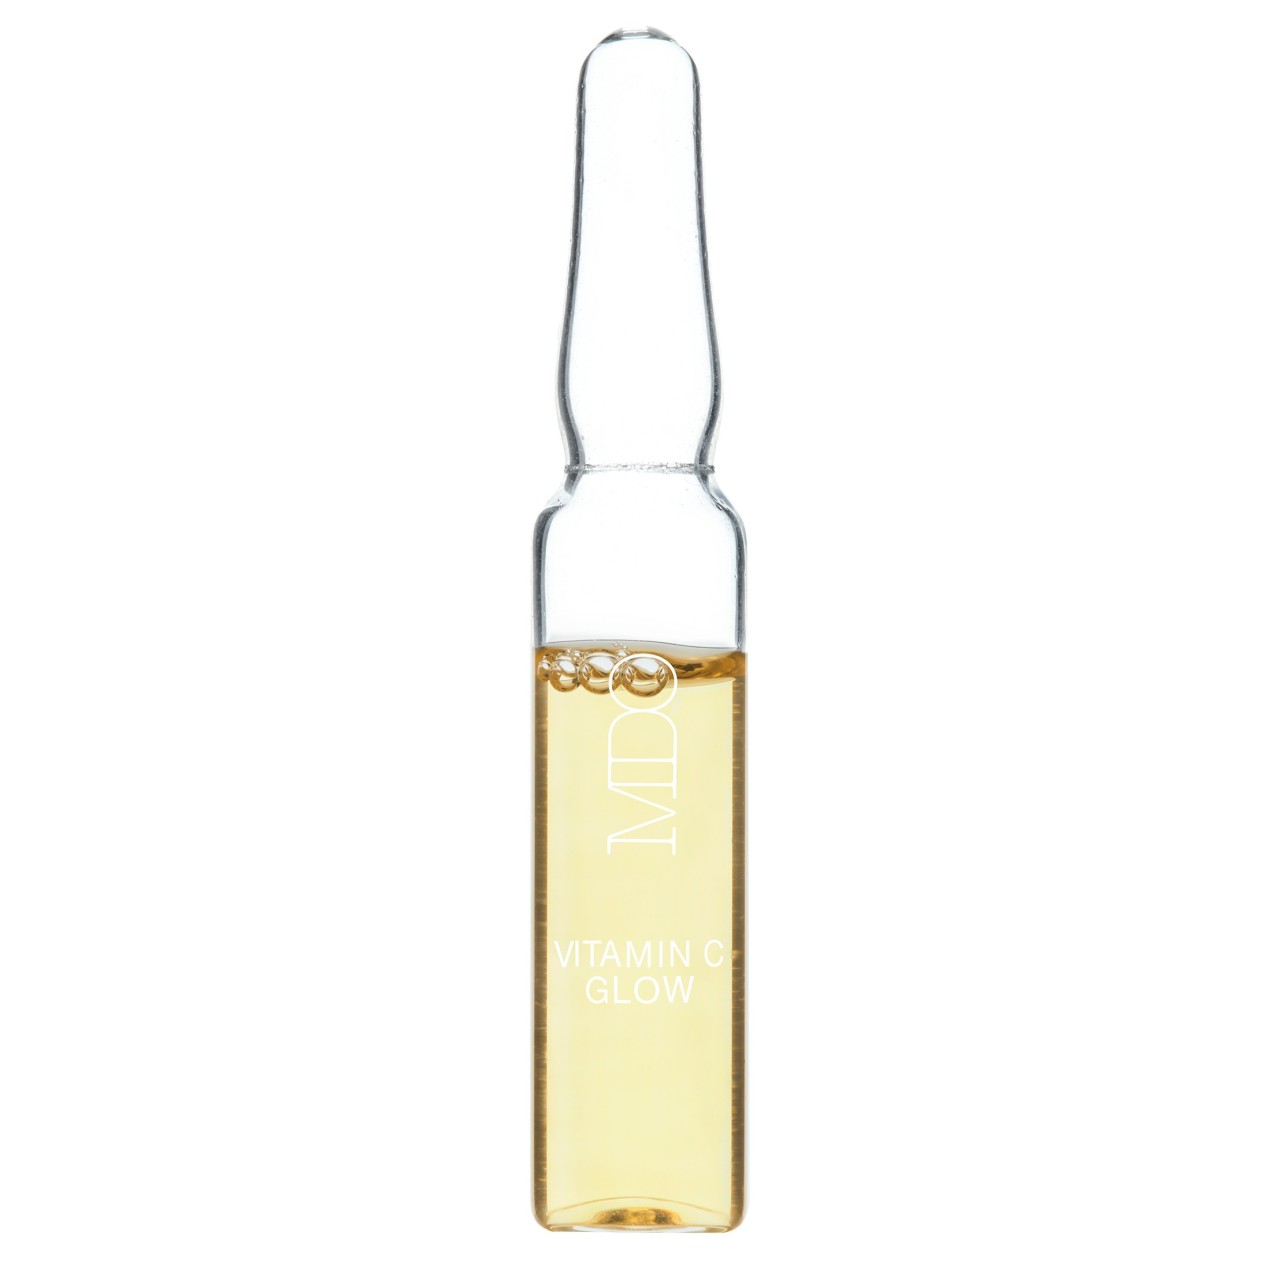 MDO by Simon Ourian M.D. Vitamin C Glow Ampoule